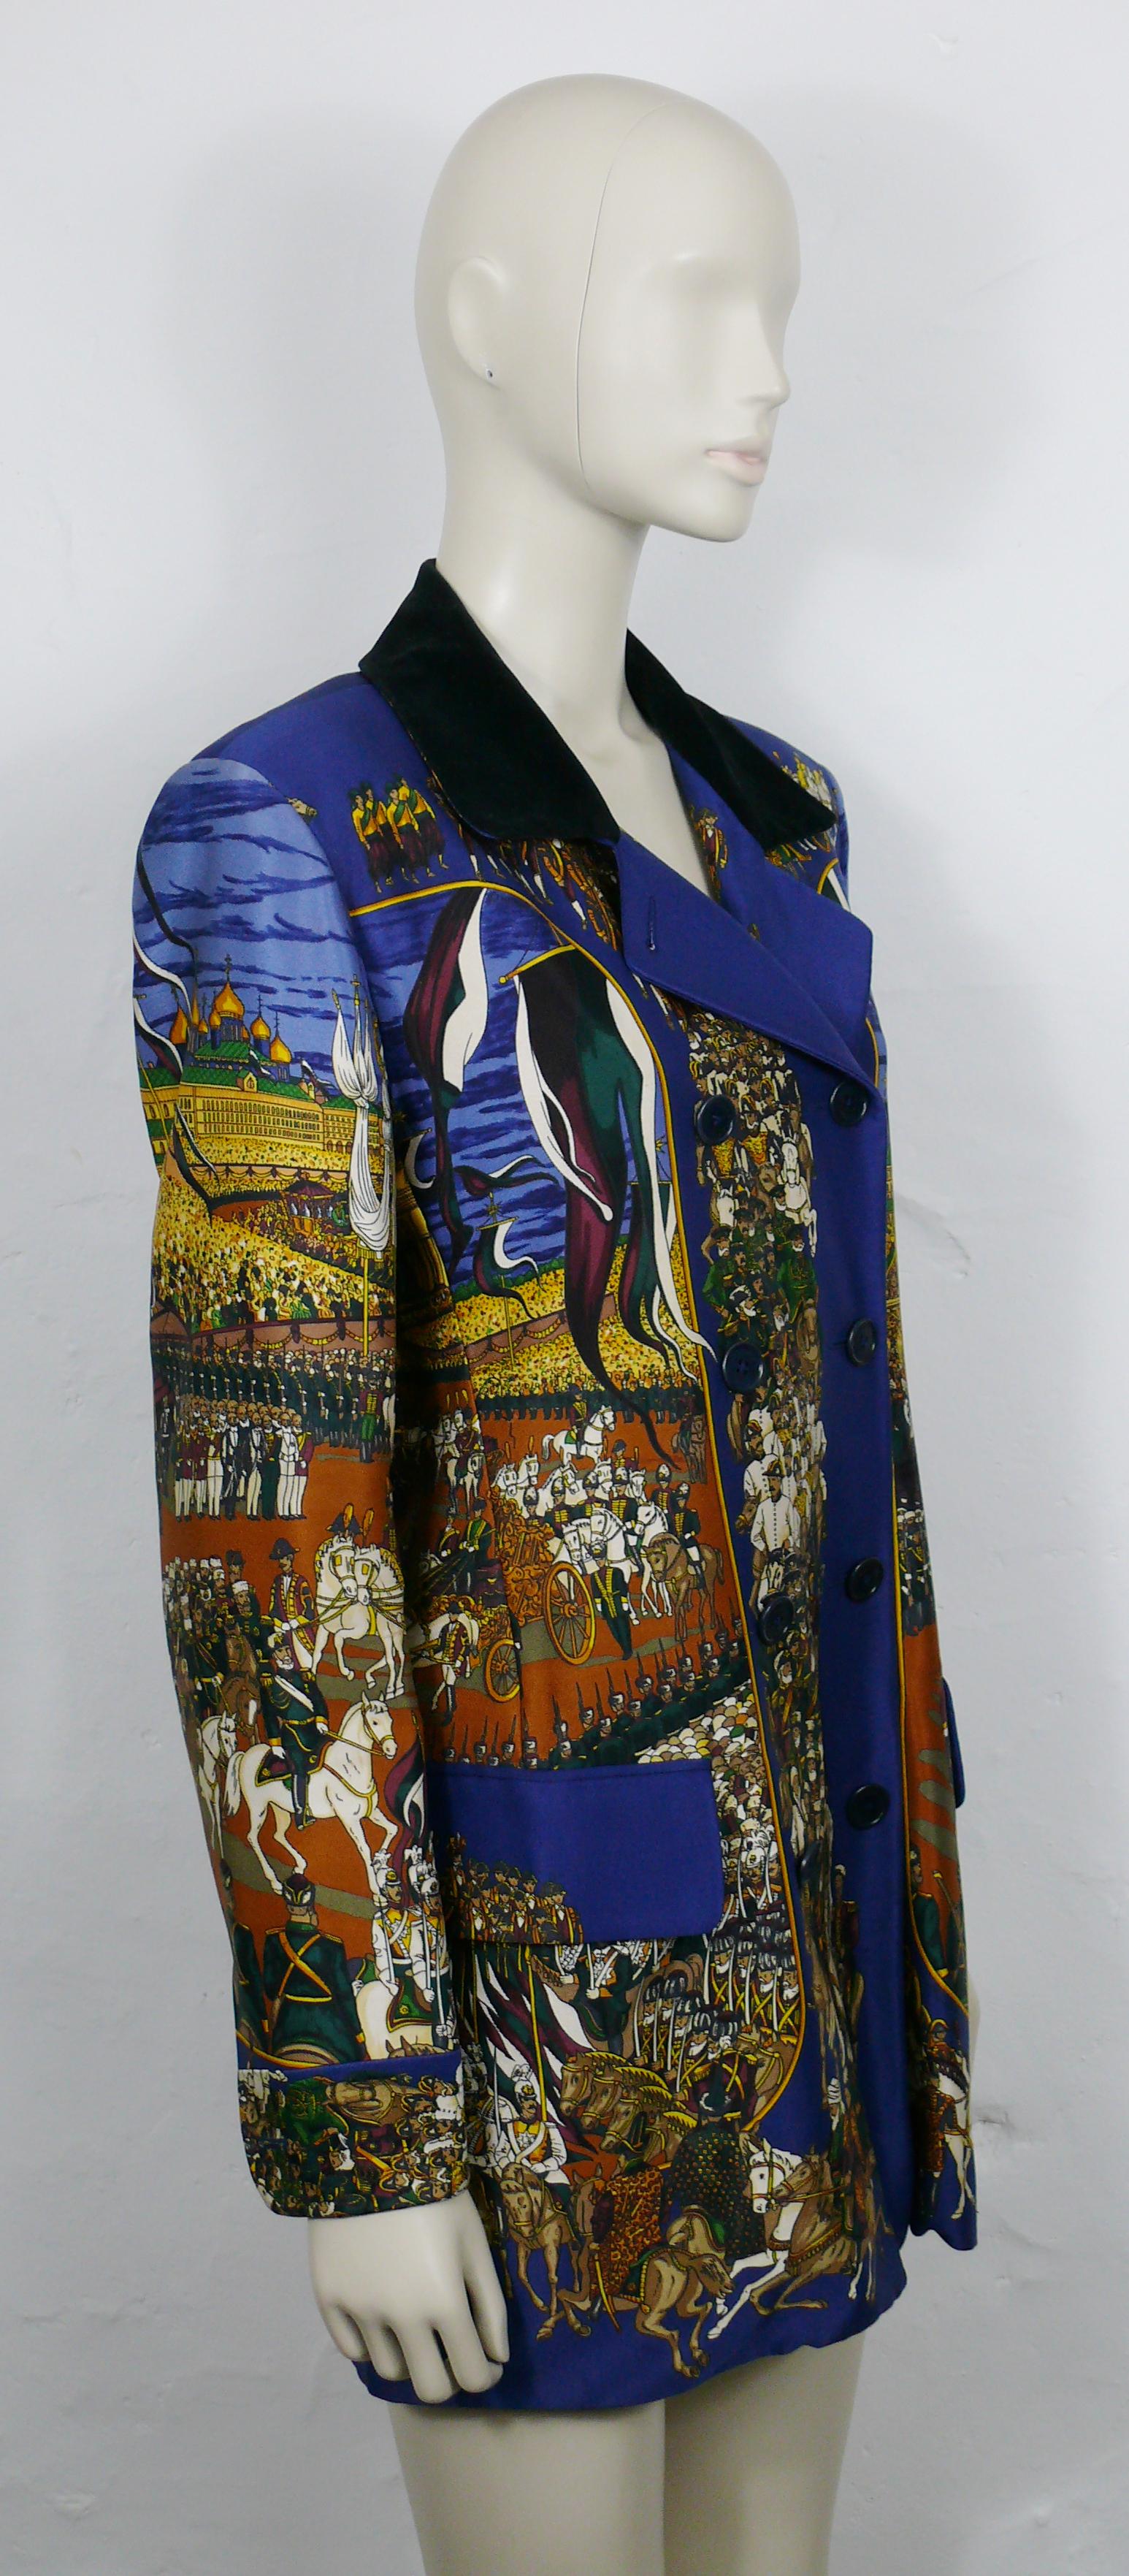 HERMES vintage rare GRAND CORTEGE A MOSCOU double breasted jacket designed by MICHEL DUCHENE, depicting NAPOLEON BONAPARTE march into the city of Moscow in 1812.

This jacket features :
- Opulent multicolor print of soldiers, horses, carriages,